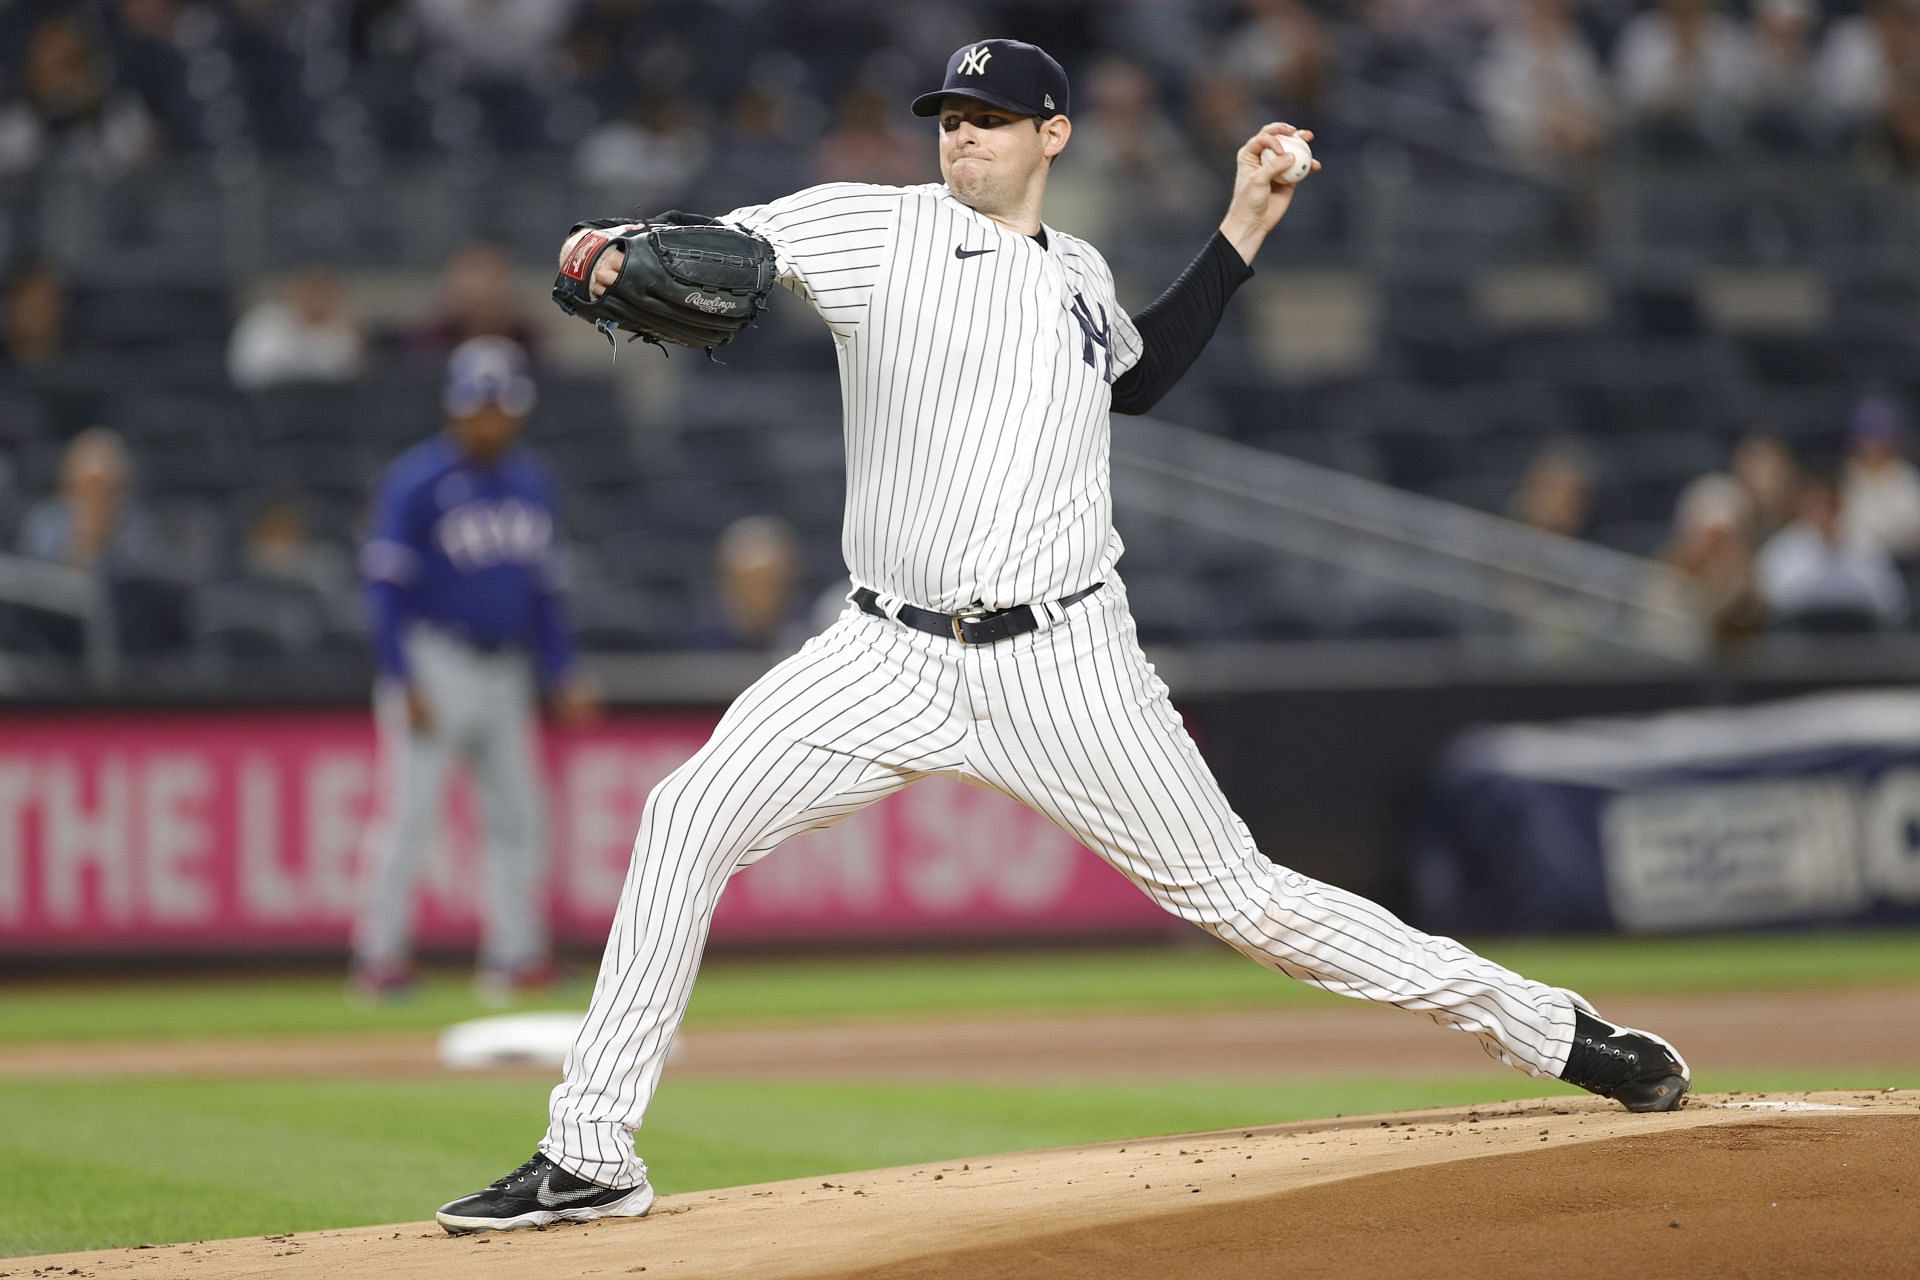 Jordan Montgomery is the projected starter for Sunday